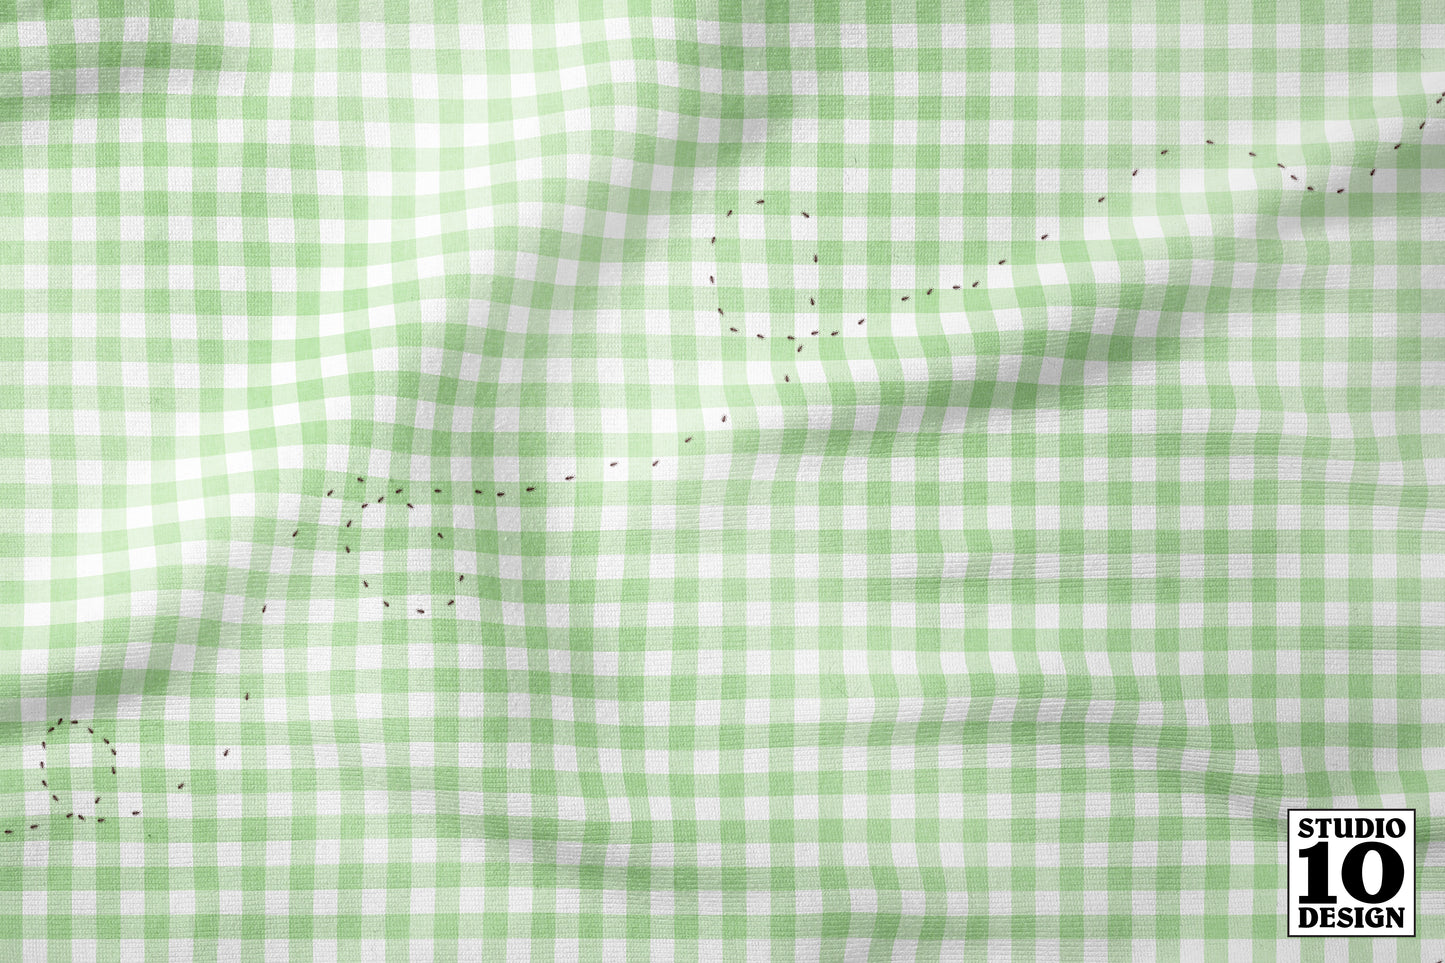 Ants at the Picnic, Green Gingham Printed Fabric by Studio Ten Design